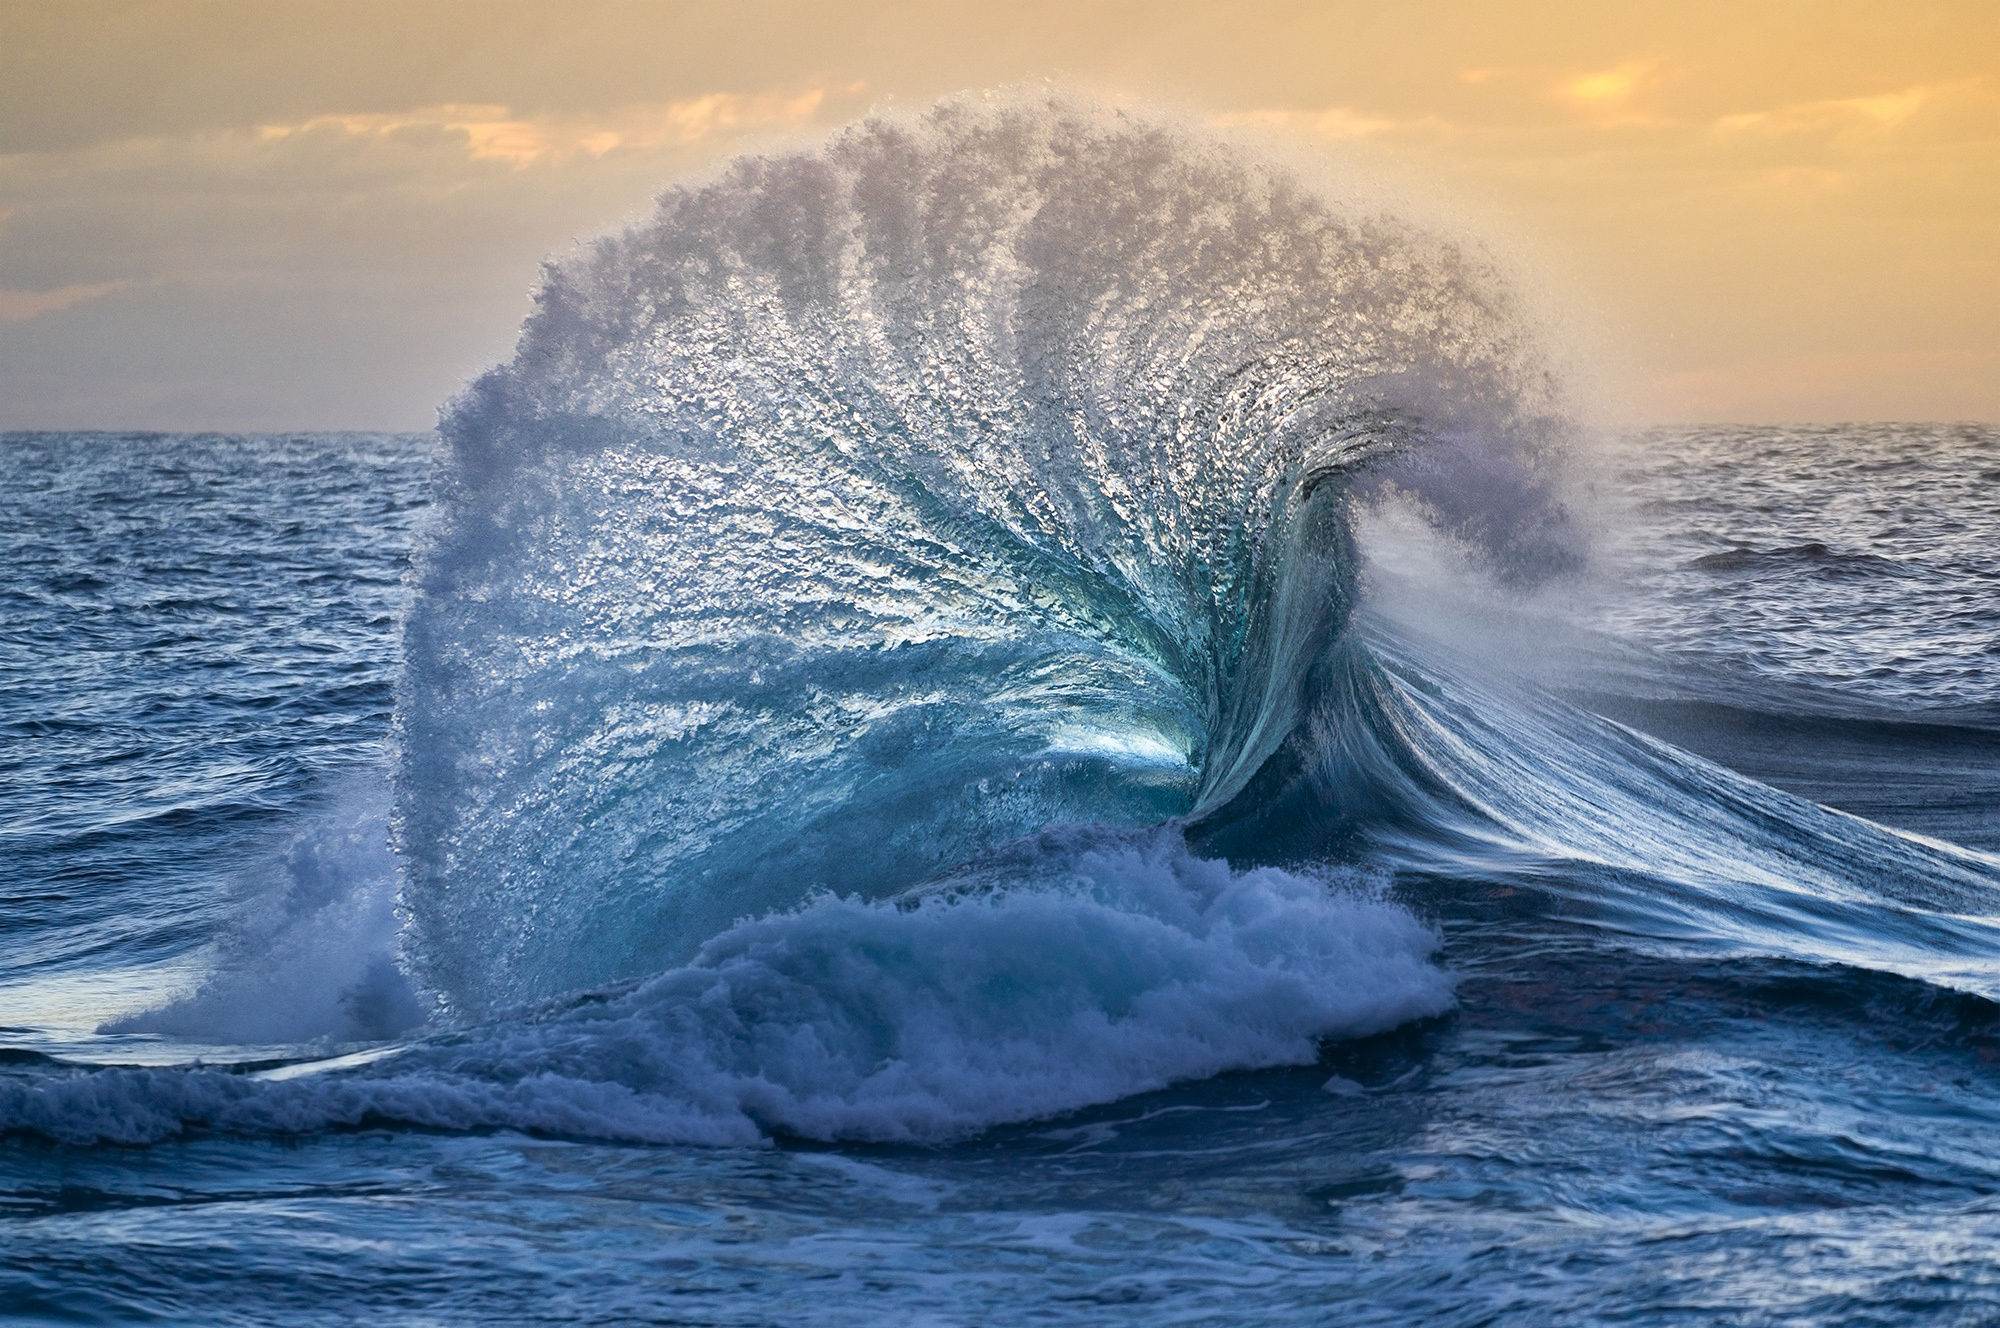 Magnificent Wave by William Patino